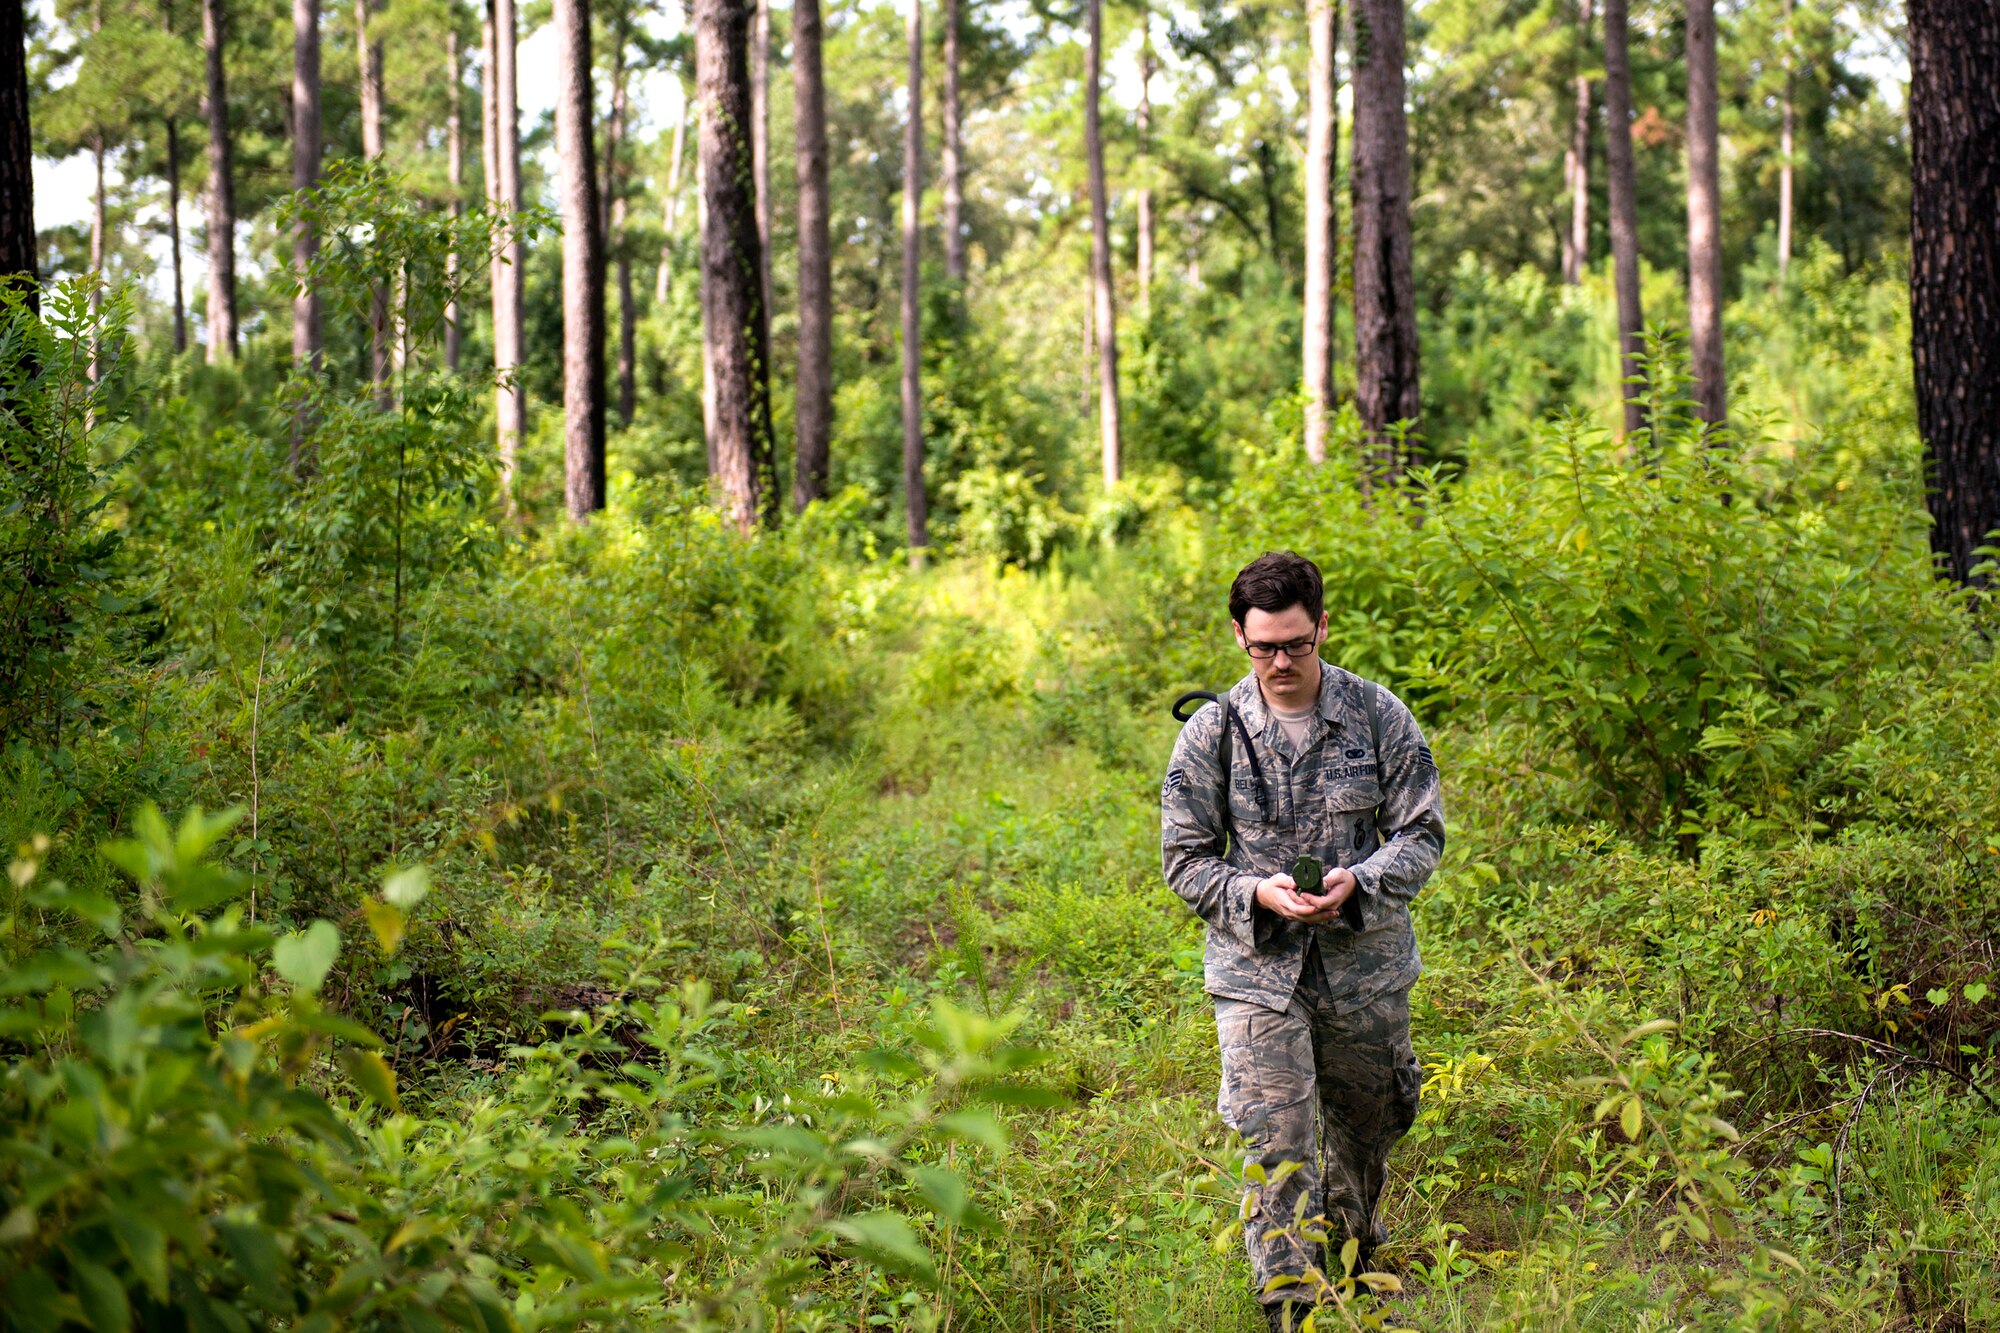 Senior Airman Parker Bell, 23d Security Forces Squadron section patrolman, examines a compass during the land-navigation portion of the Defender Challenge assessment, July 30, 2018, at Moody Air Force Base, Ga. Seven Moody defenders trudged through a gauntlet that tested their capability, lethality and readiness. Ultimately, only Senior Airman Jeffrey Lewis, 822d Base Defense Squadron fireteam leader, had the scores, determination and perseverance to advance to the next level for a chance to represent Air Combat Command (ACC) during the 2018 Defender Challenge, Sept. 8-14, at Joint Base San Antonio-Camp Bullis, Texas. (U.S. Air Force photo by Airman 1st Class Erick Requadt)